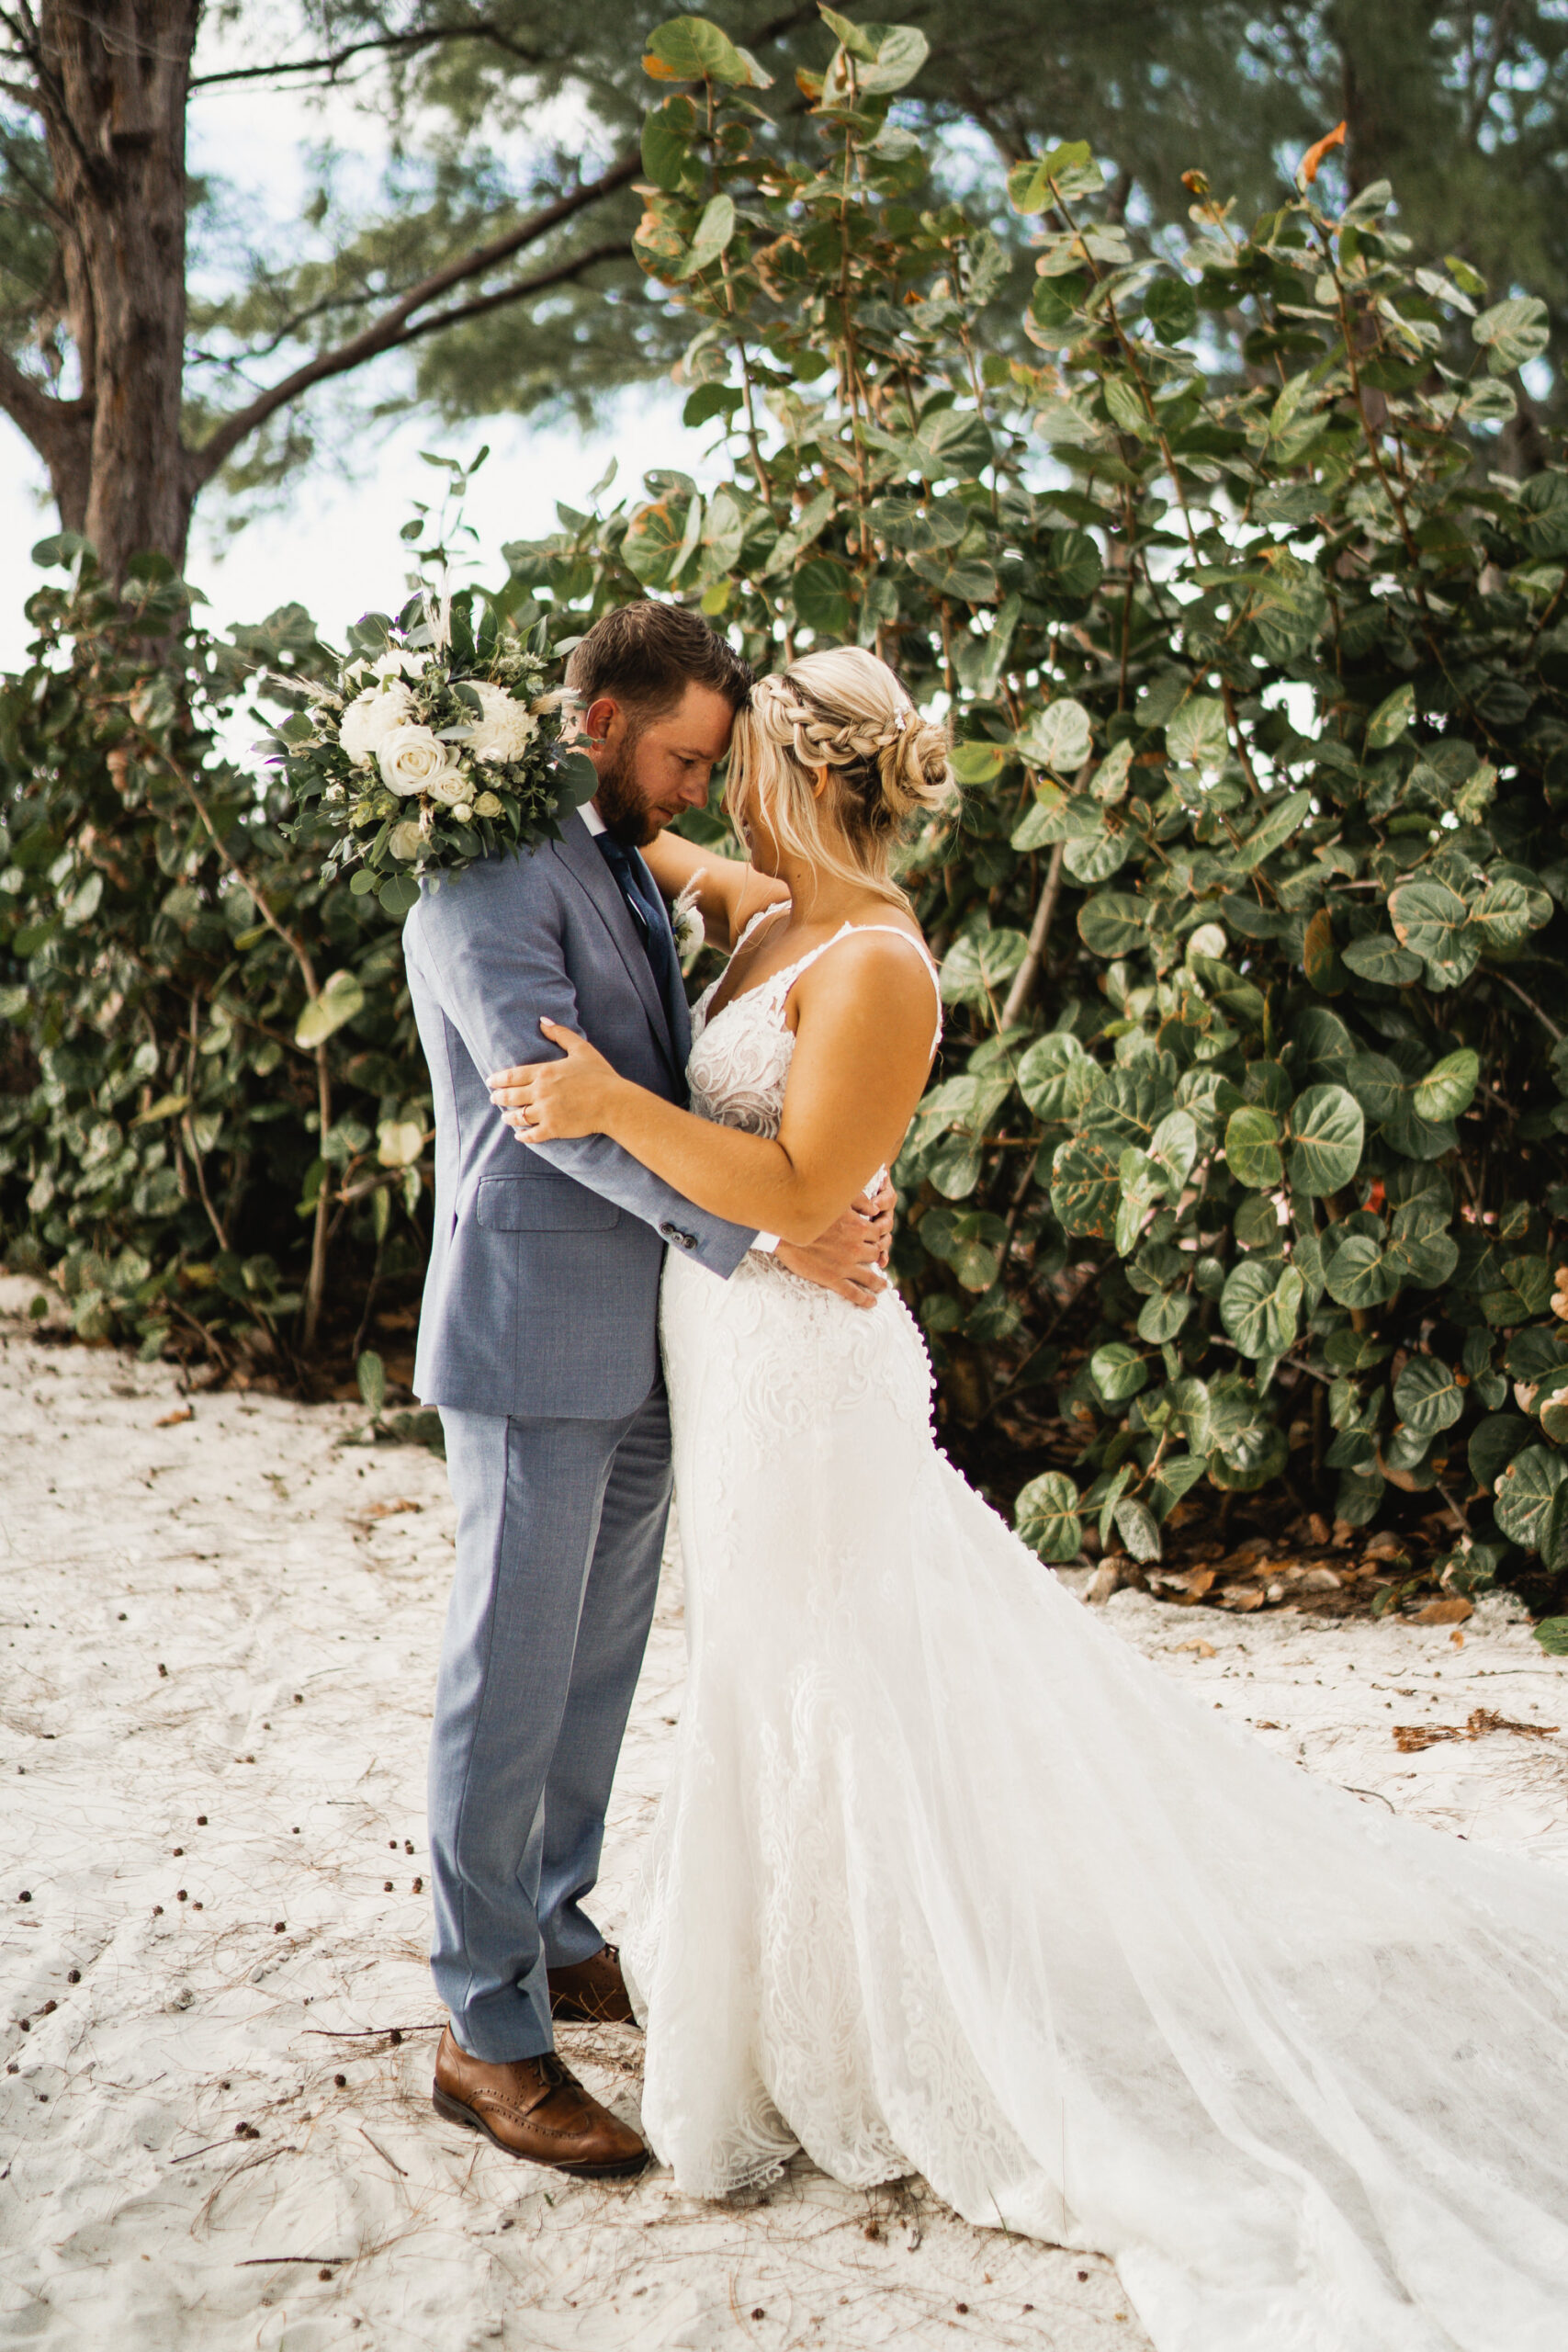 Bride and Groom First Look Beach Wedding Portrait | Tampa Bay Wedding Videographer and Photographer J&S Media